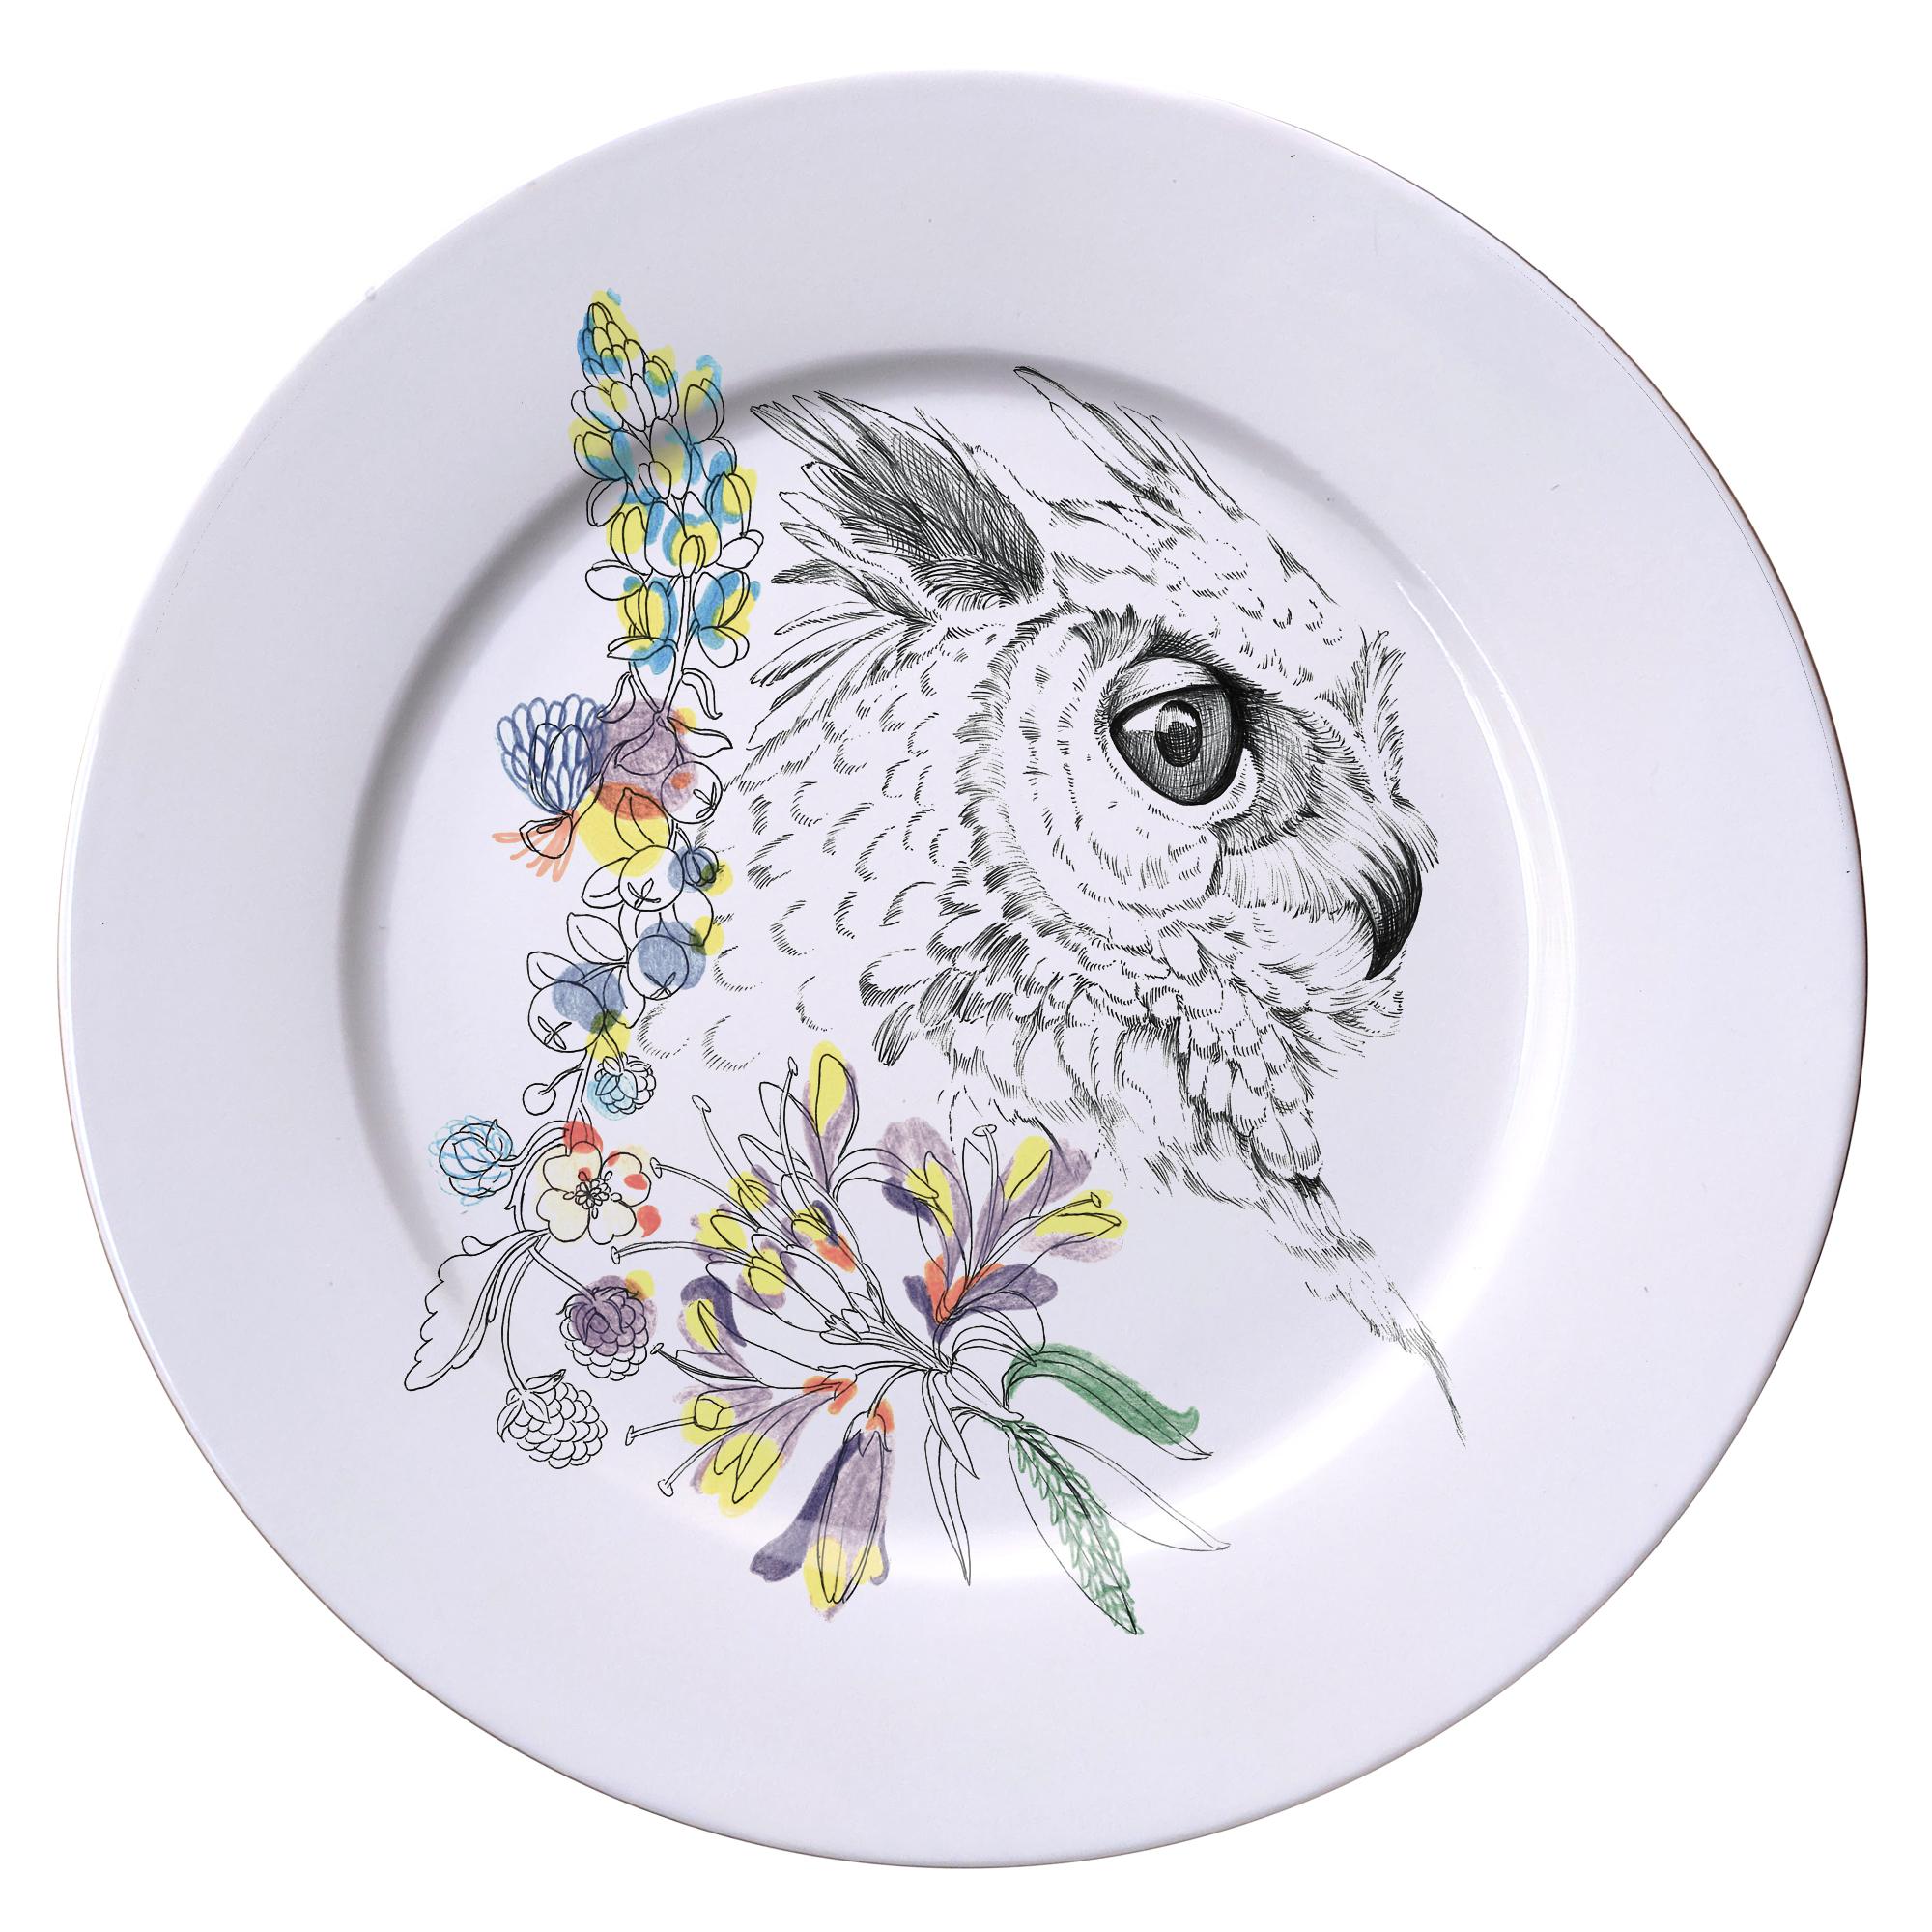 Ode to the Woods, Contemporary Porcelain Dinner Plate with Owl and Flowers For Sale